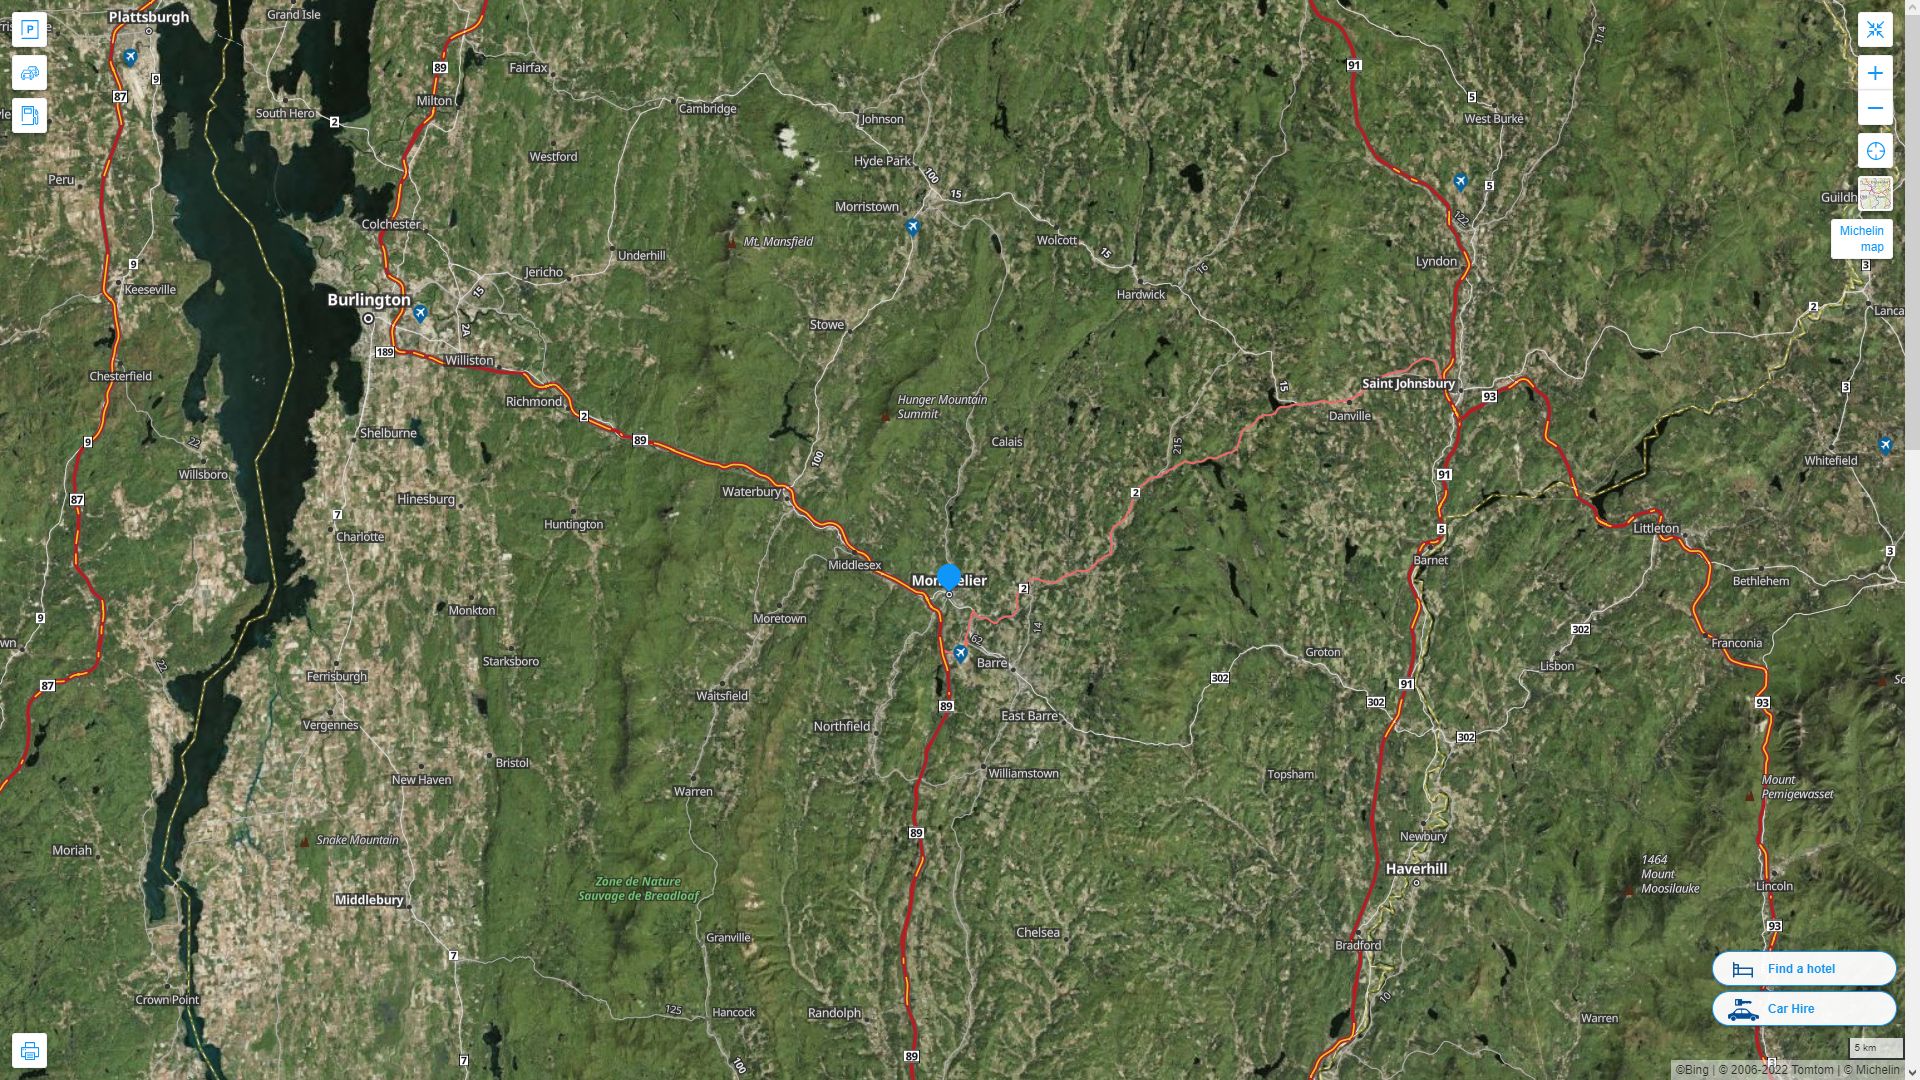 Montpelier Vermont Highway and Road Map with Satellite View